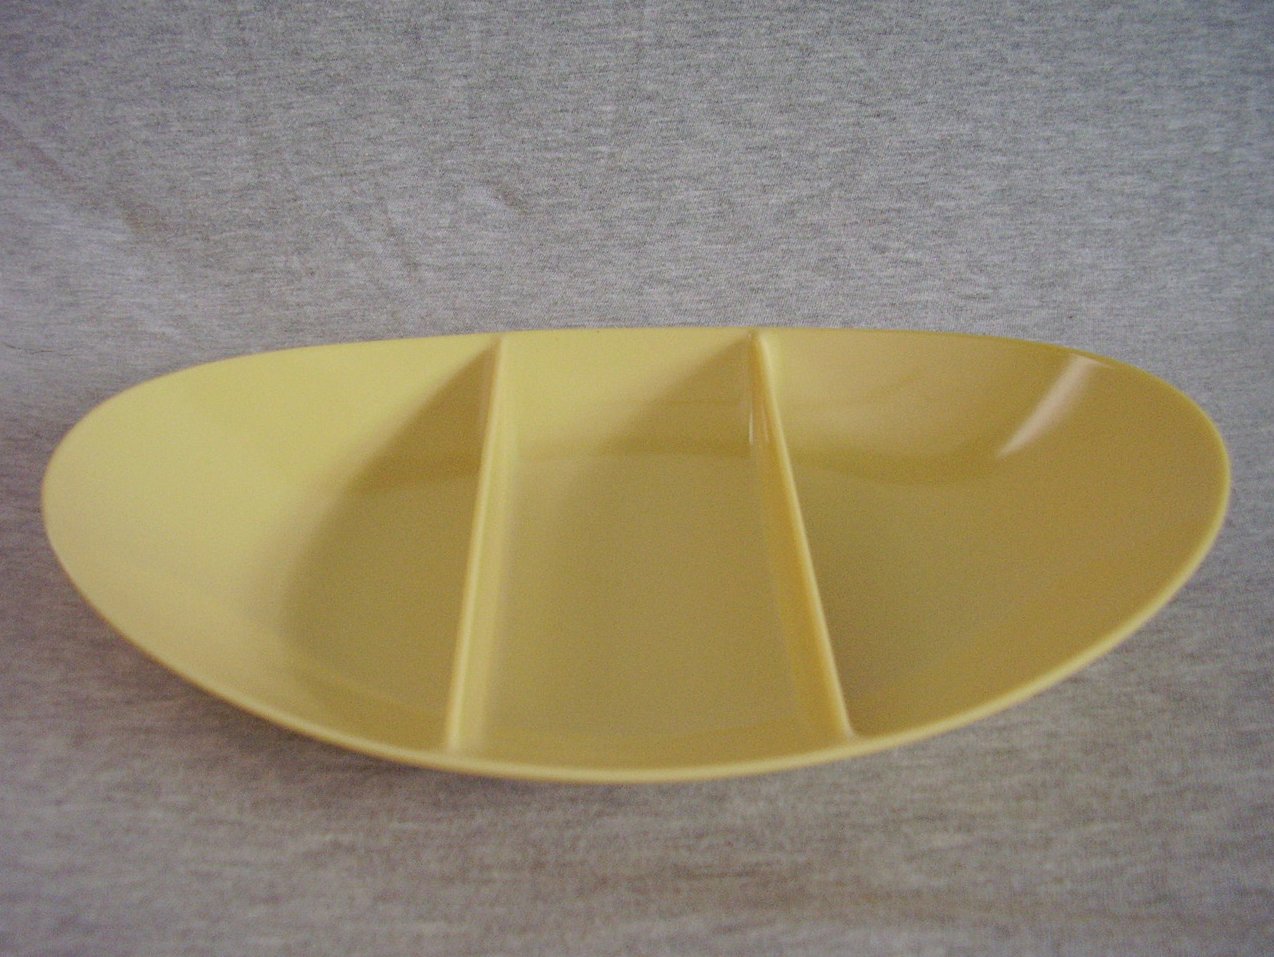 Fostoria Melmac 3 Section Divided Serving Dish Bowl